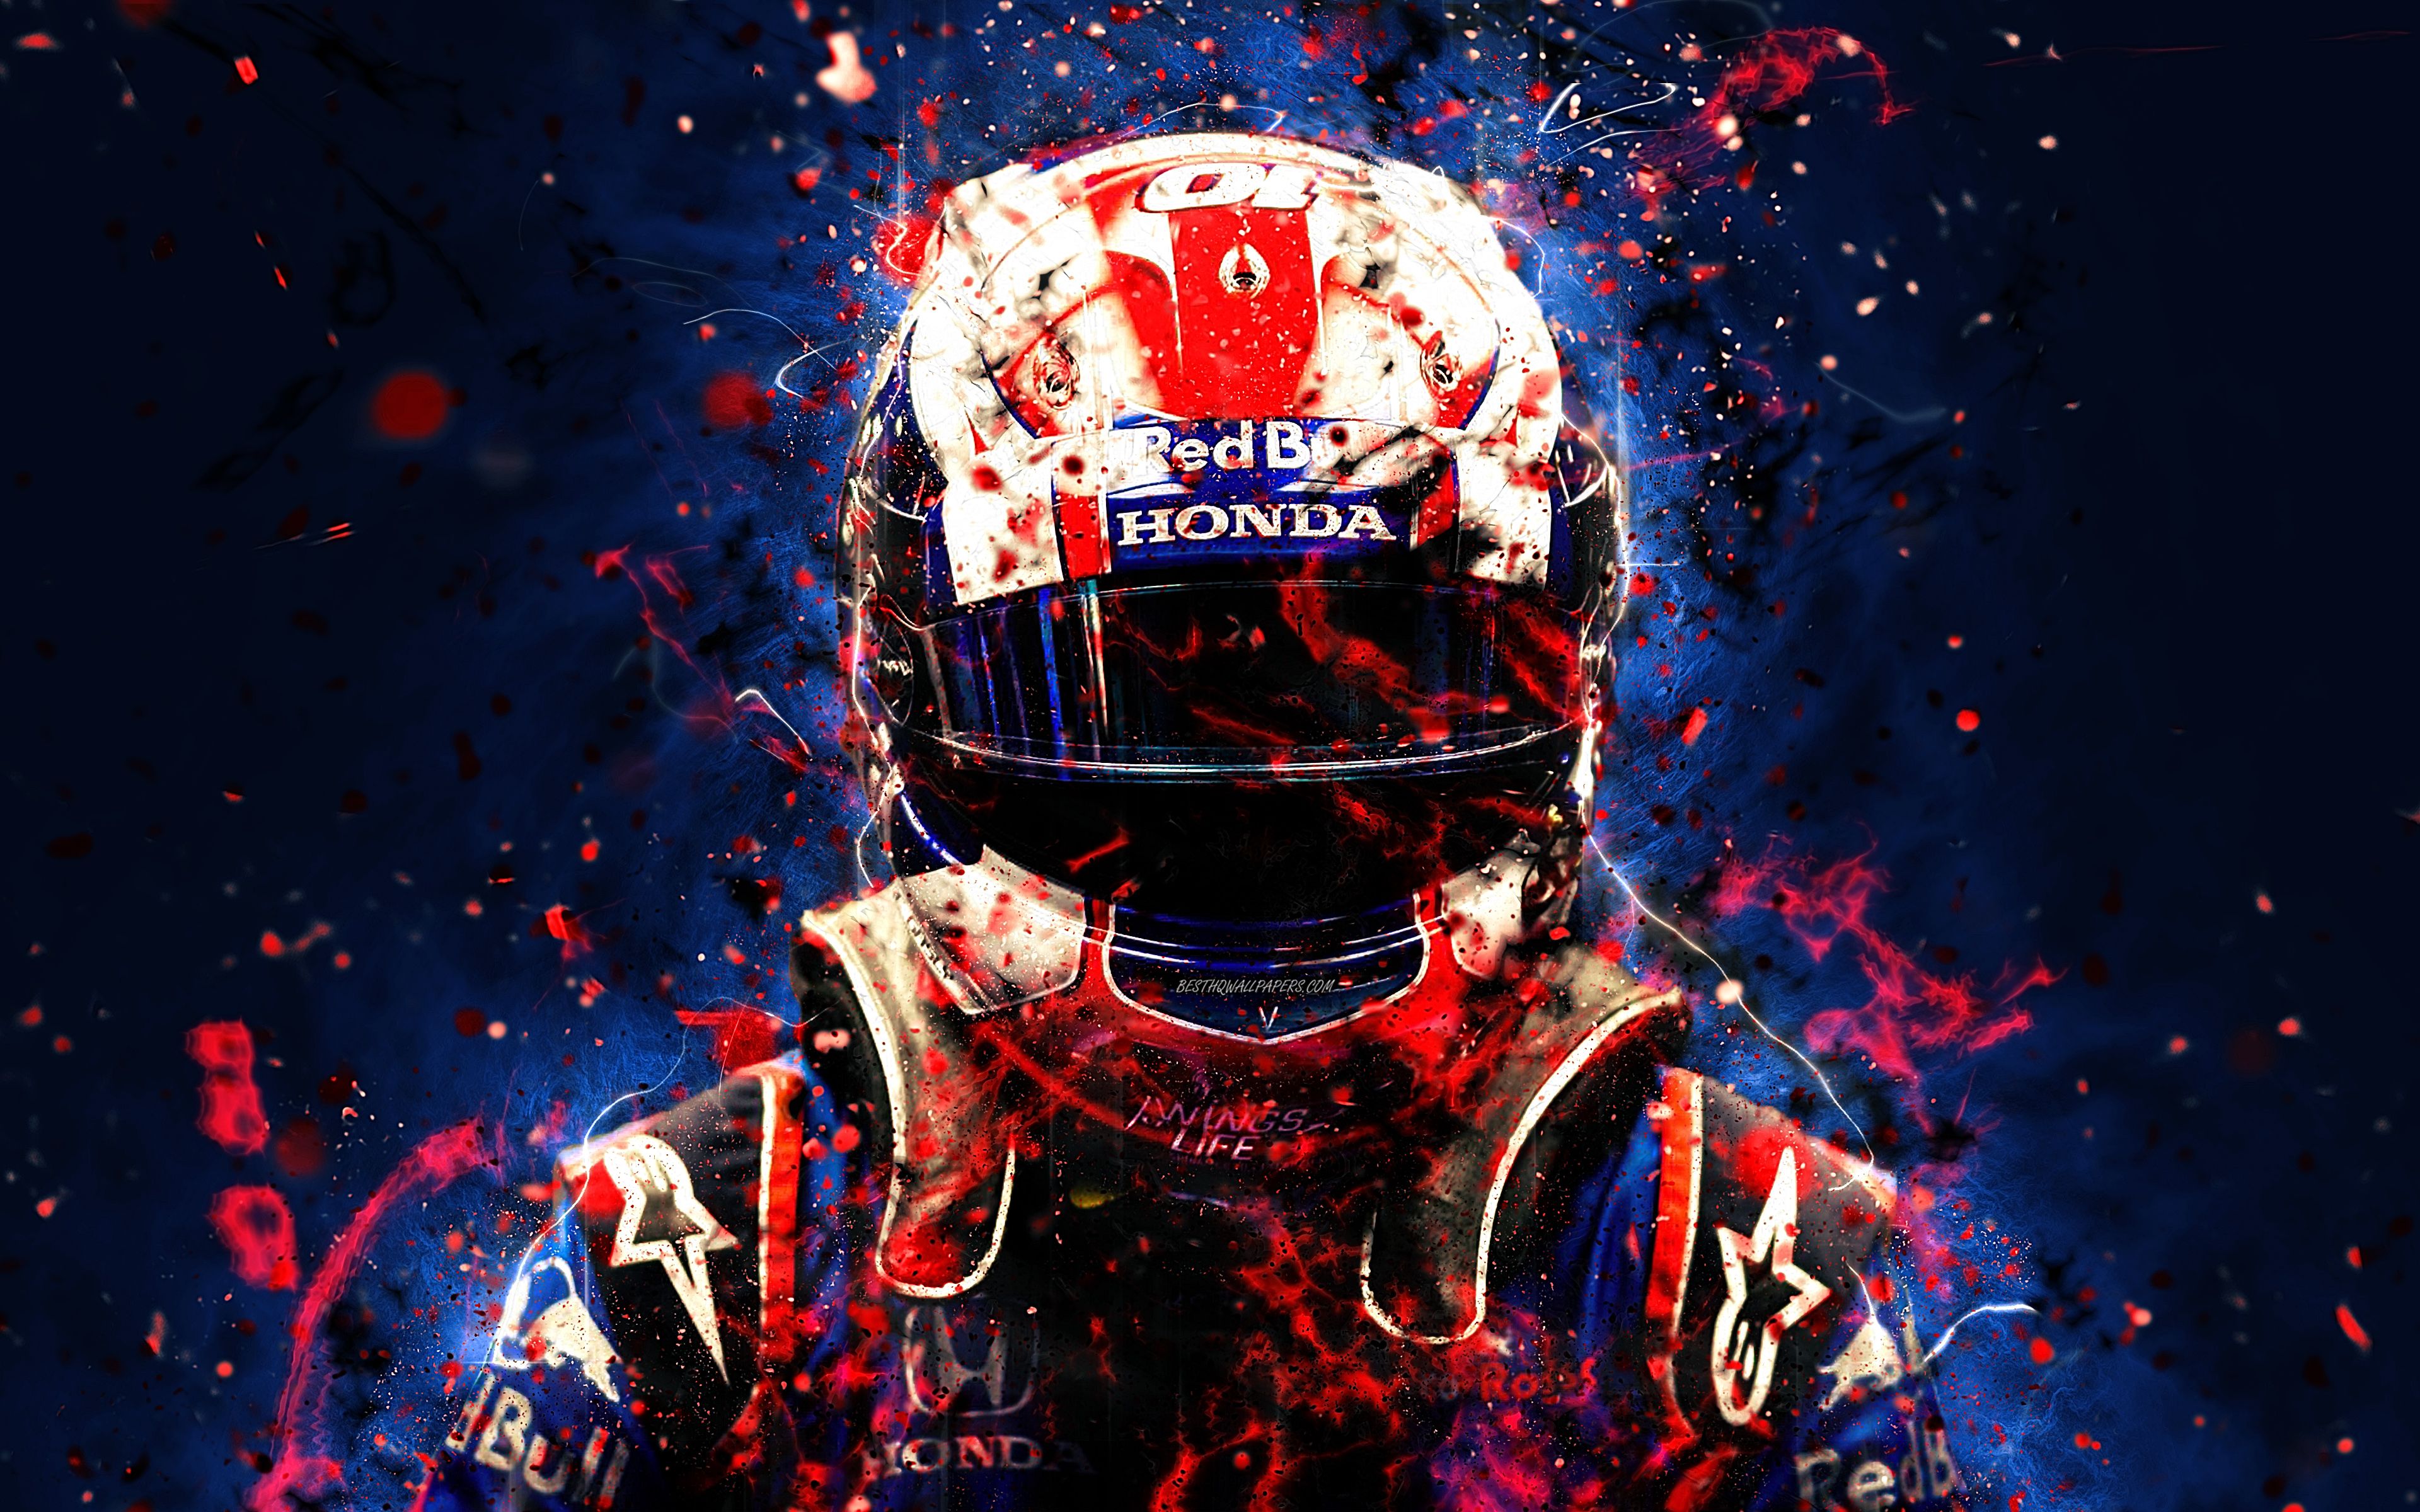 Download wallpaper 4k, Pierre Gasly, abstract art, Formula F Toro Rosso Red Bull Toro Rosso, Gasly, neon lights, Formula One, Toro Rosso for desktop with resolution 3840x2400. High Quality HD